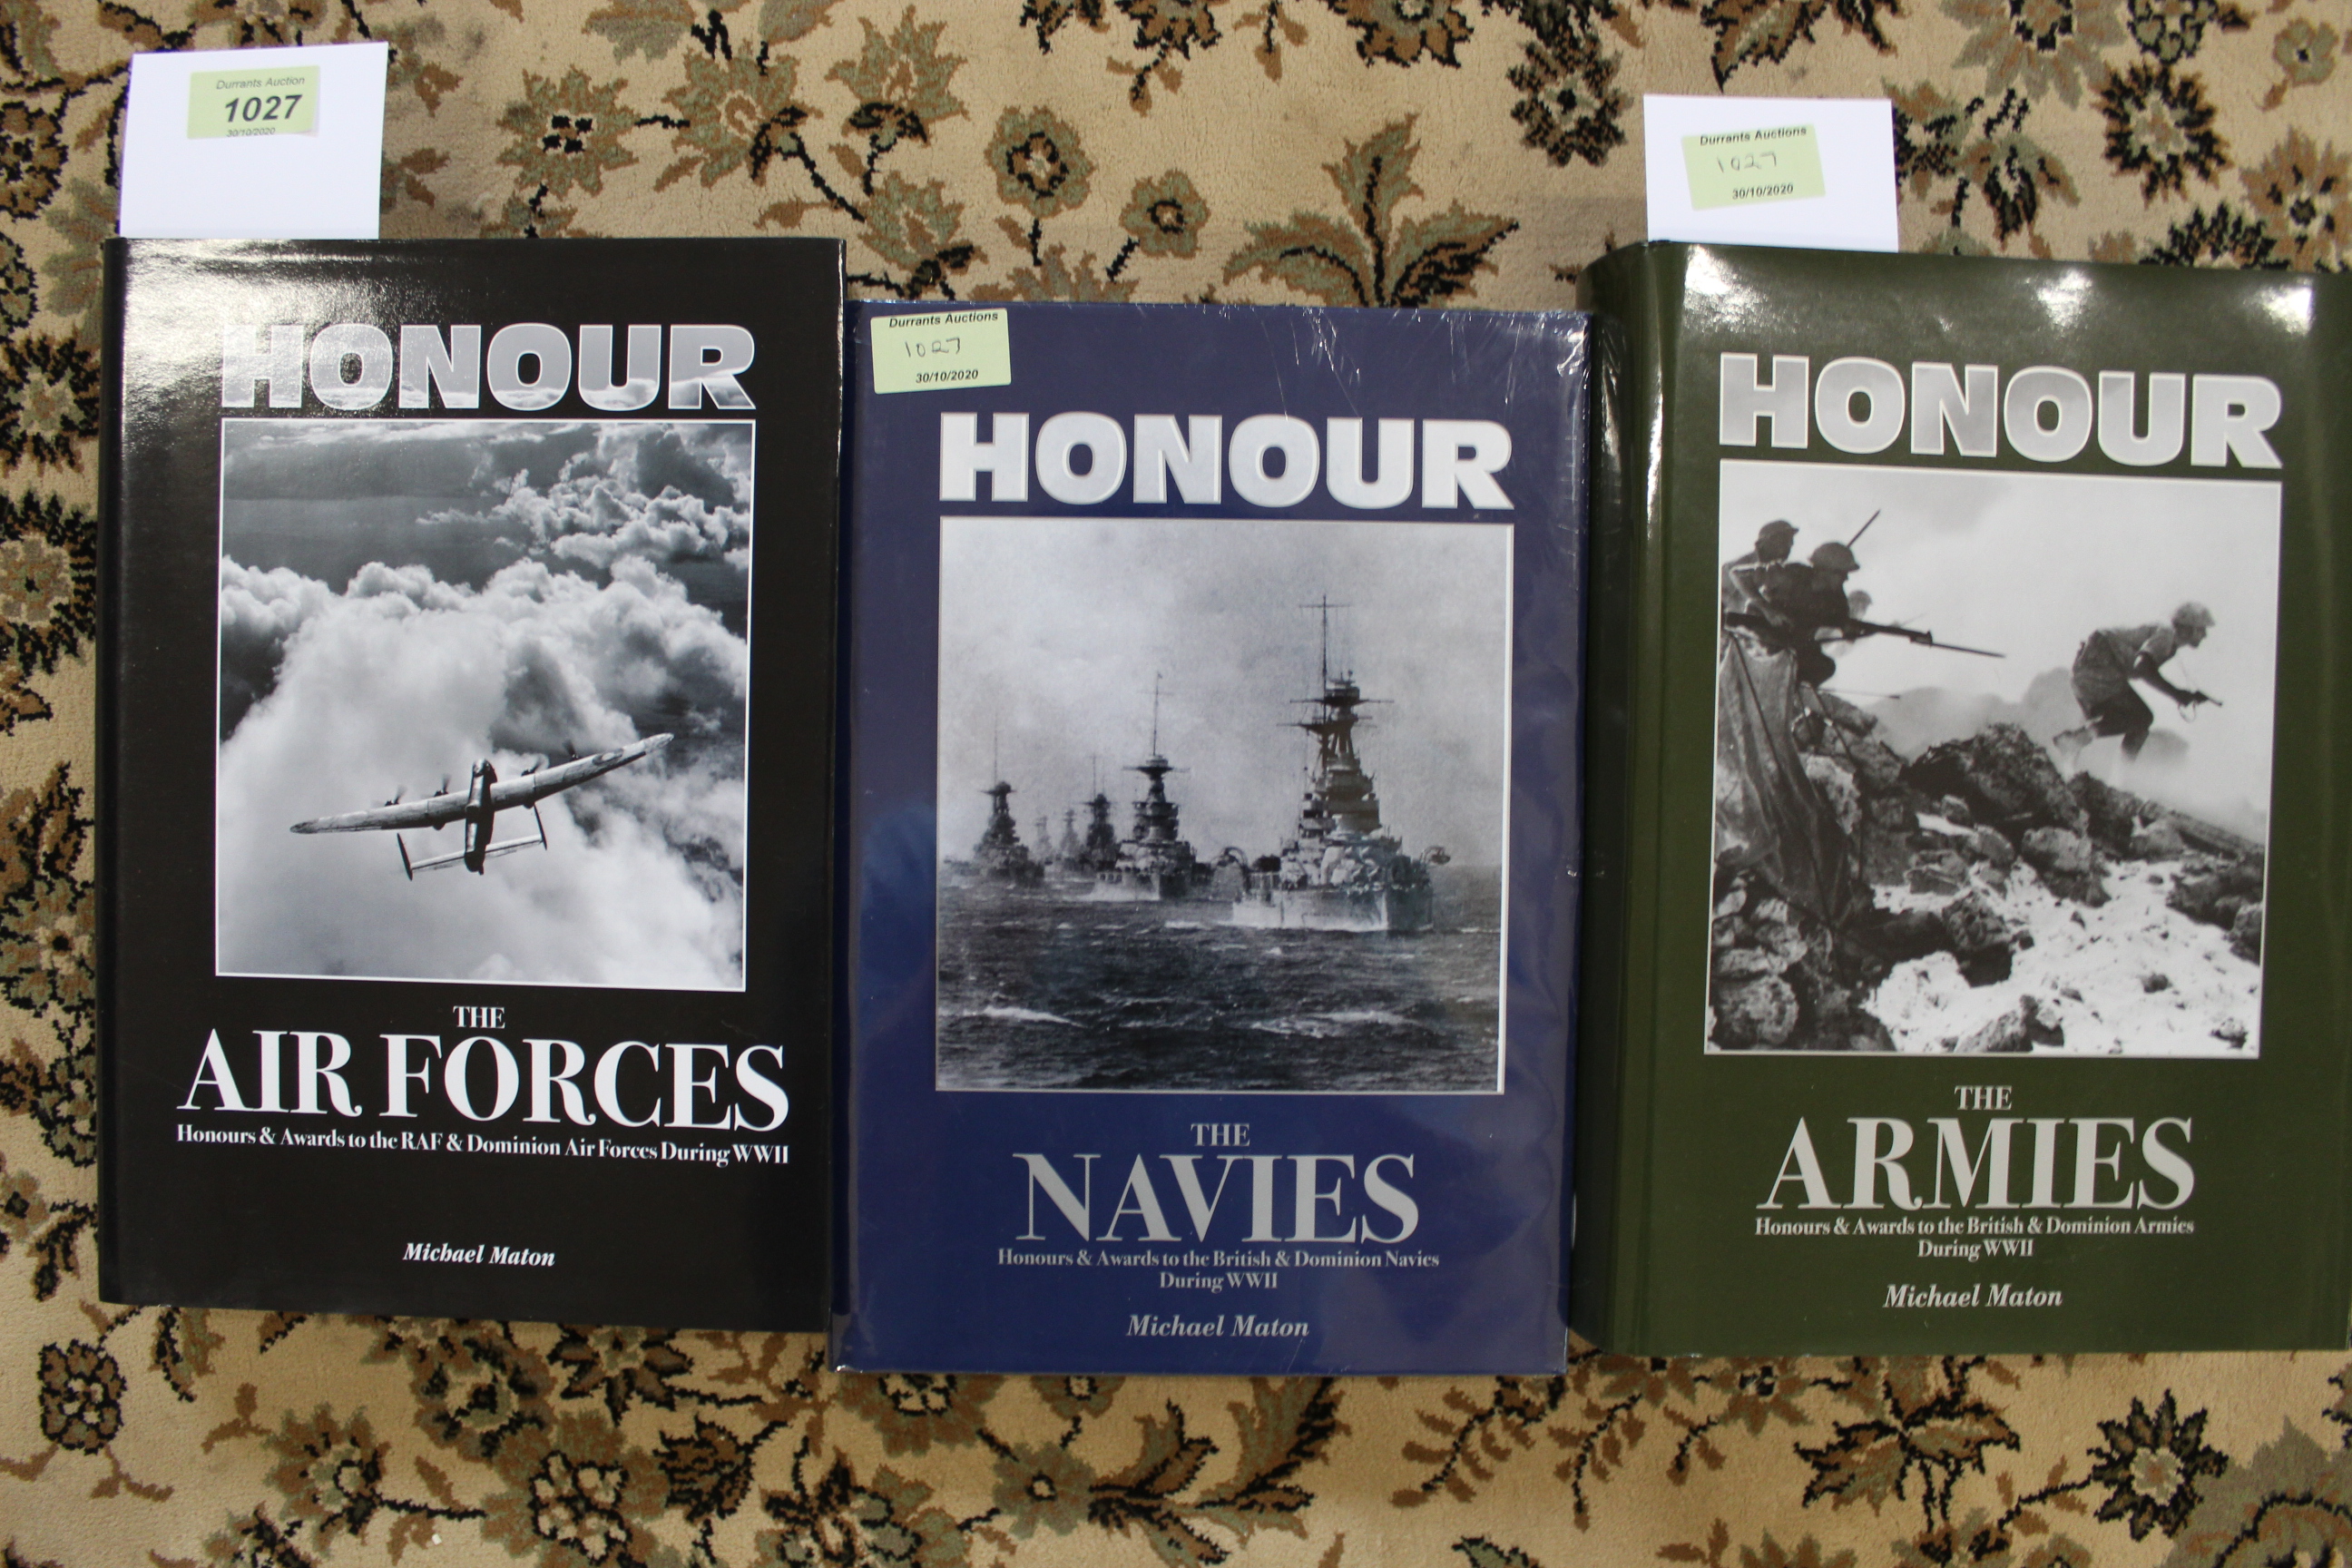 "Honour the Navies", "Honour the Armies" and "Honour the Air Forces",